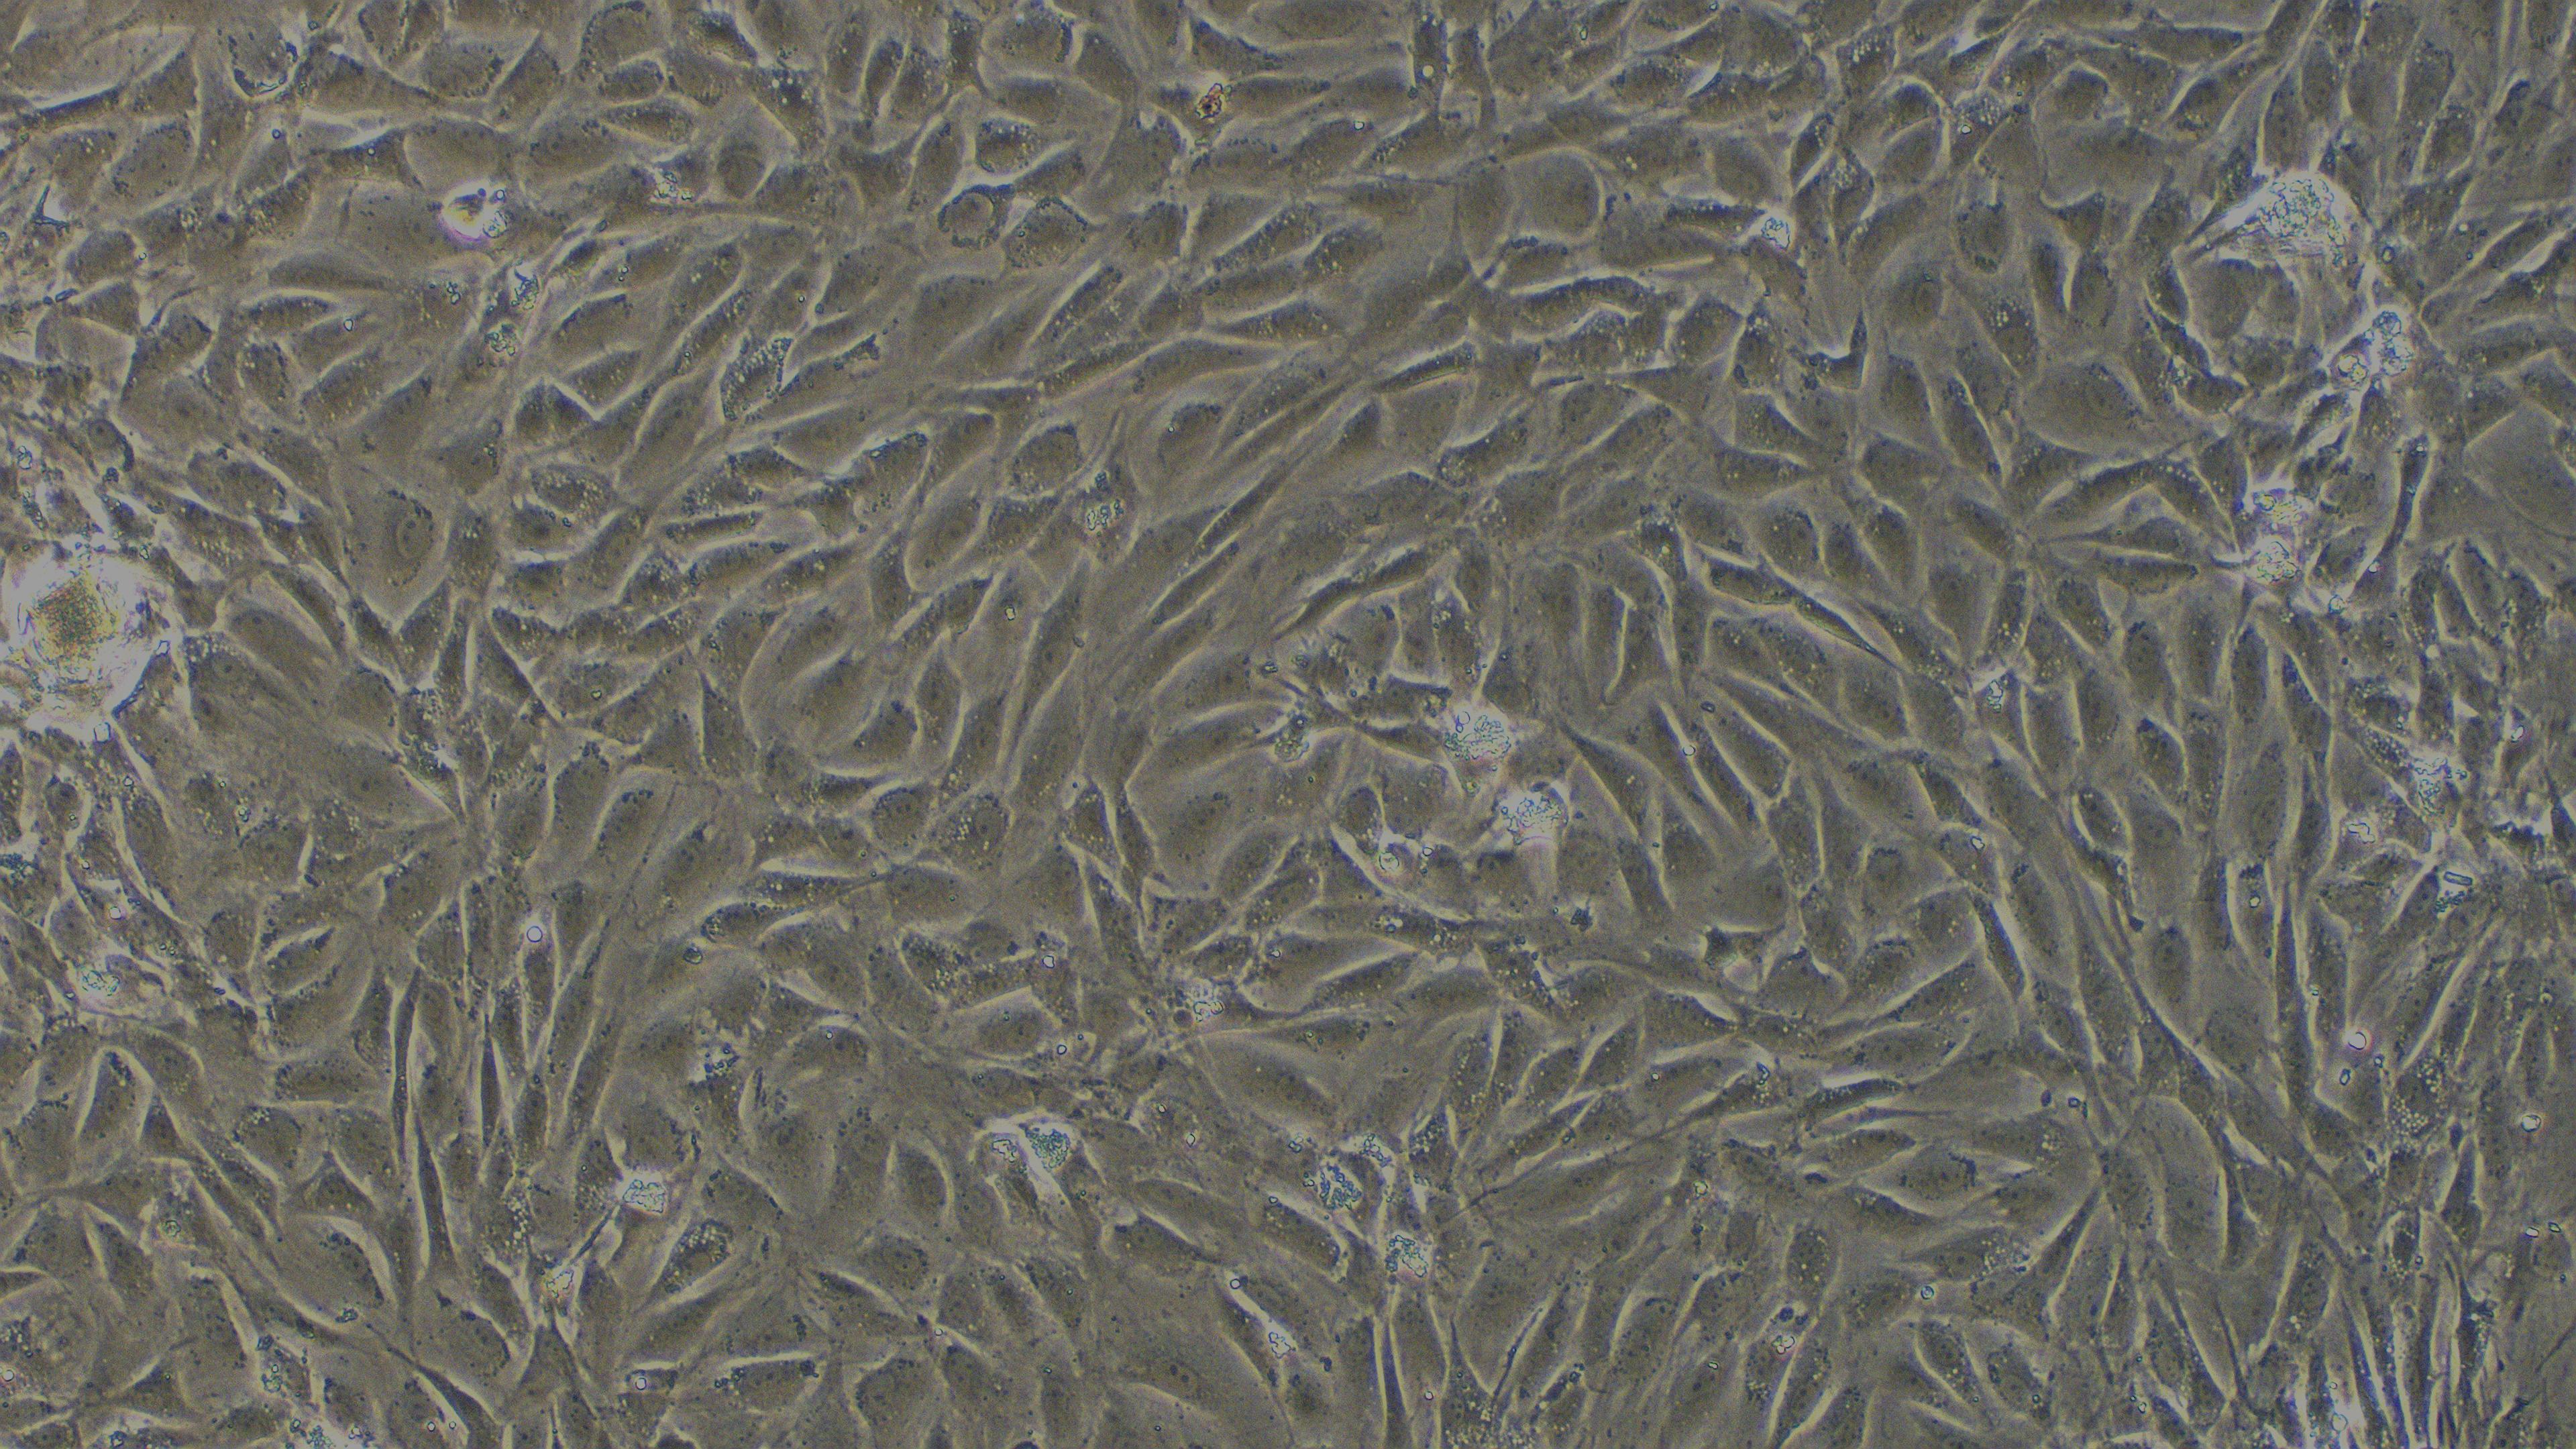 Primary Rat Esophageal Smooth Muscle Cells (ESMC)